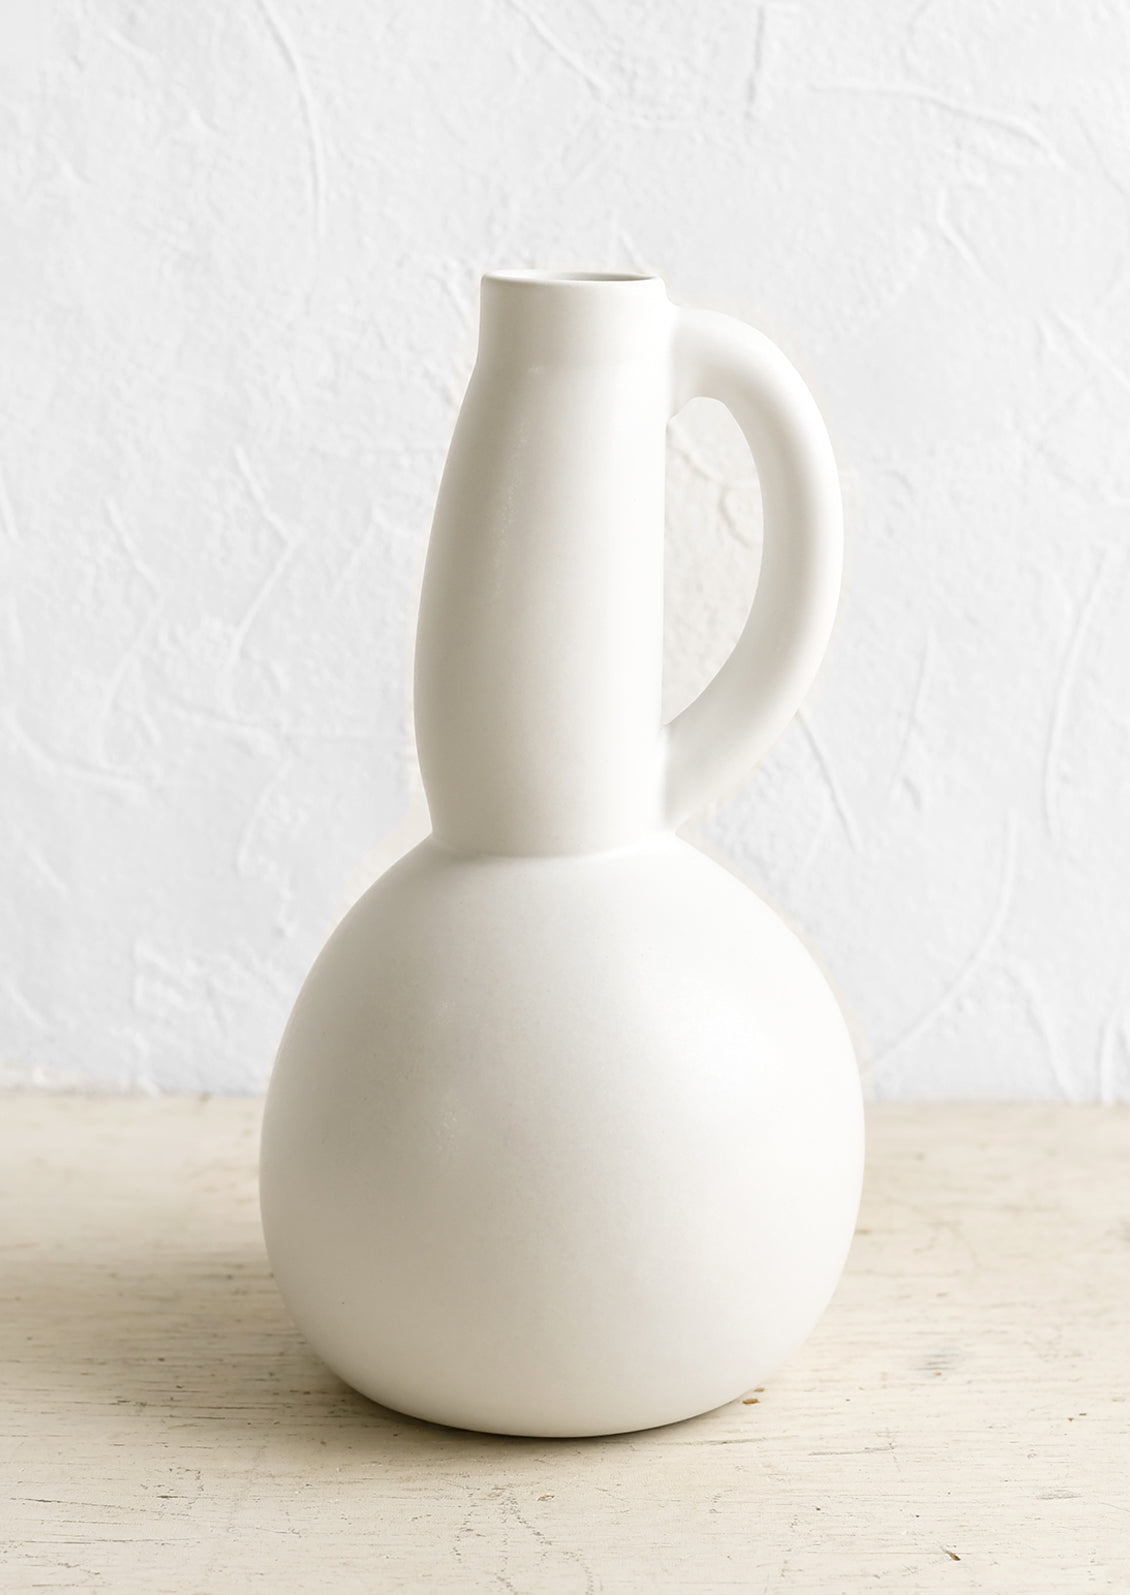 A white ceramic pitcher with curved, voluptuous silhouette.